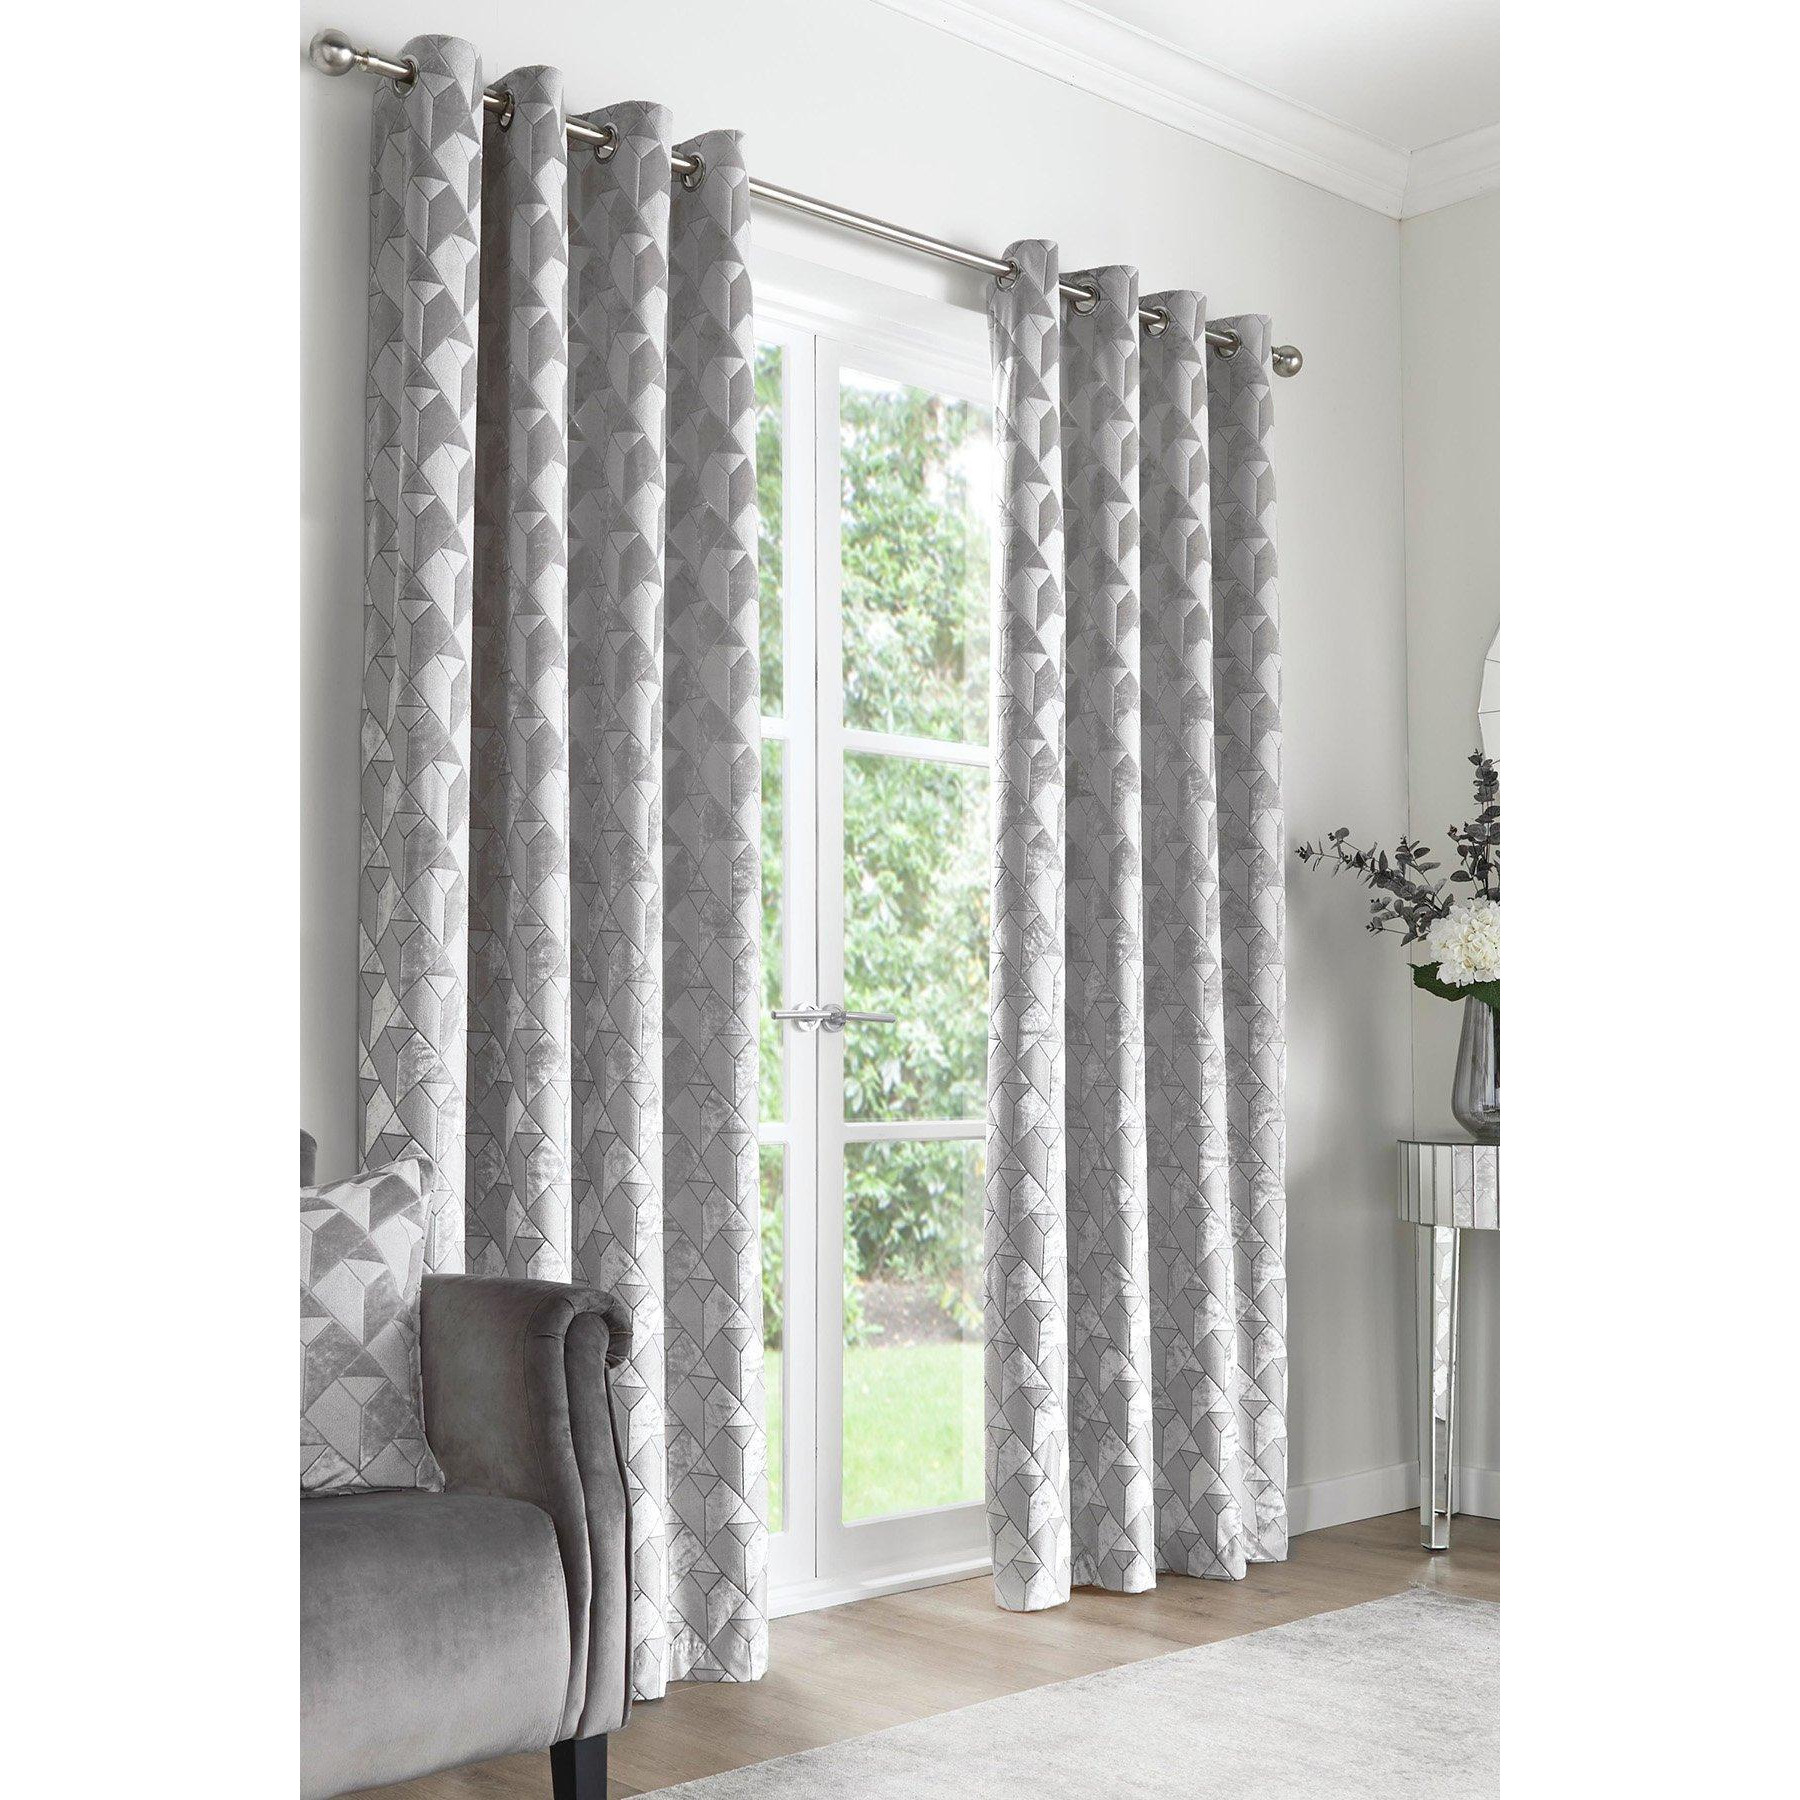 'Quentin' Jacquard Pair of Eyelet Curtains - image 1